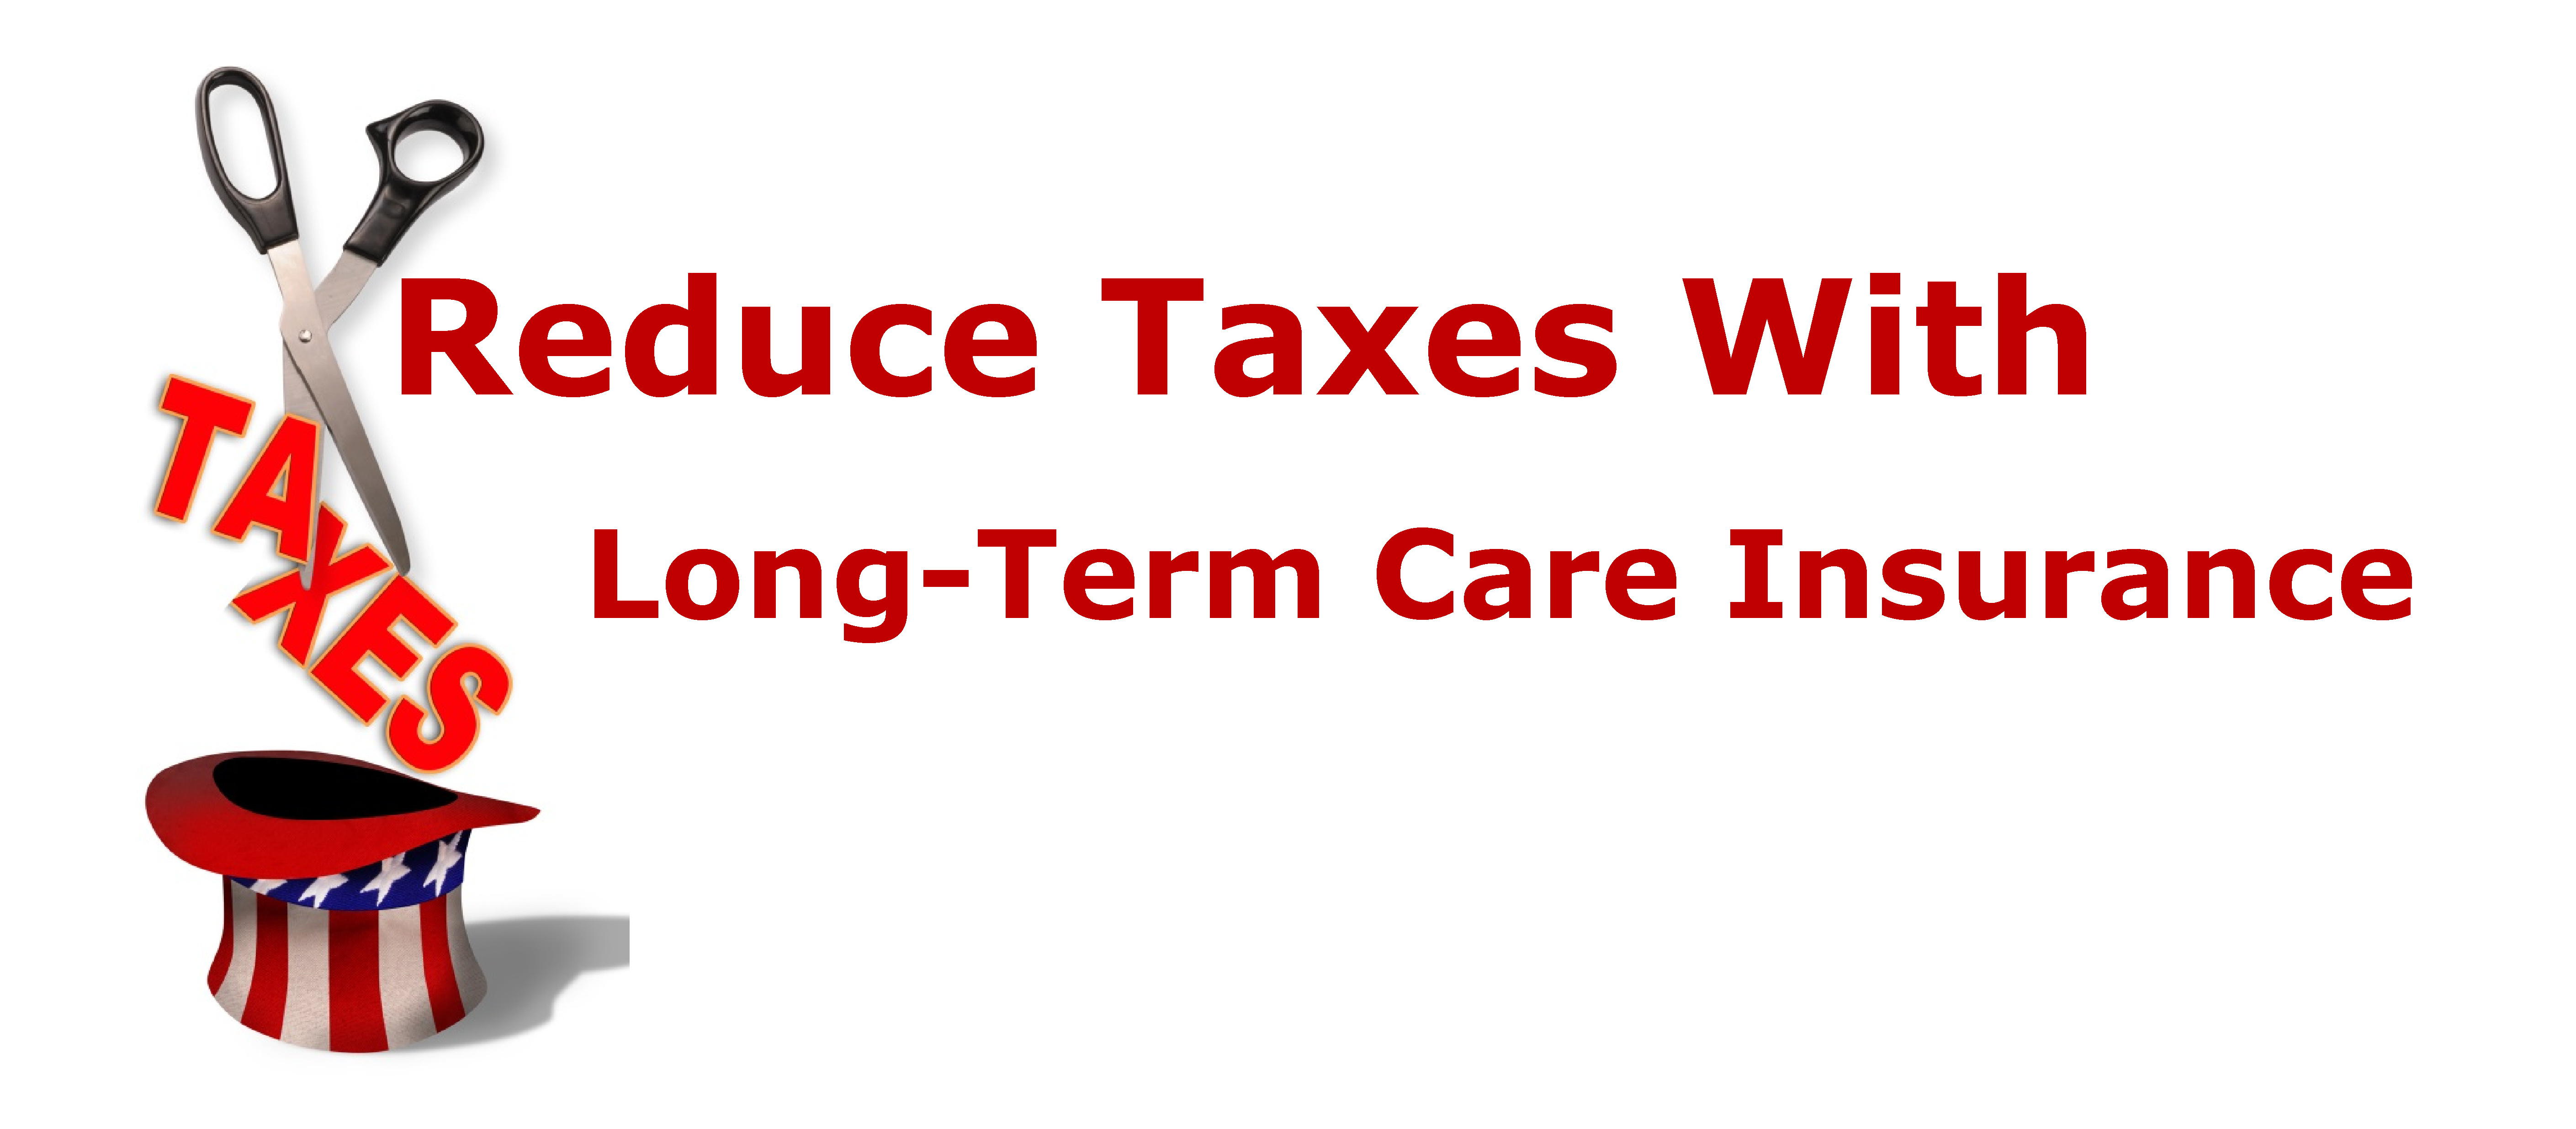 reduce taxes with long term care insurance image